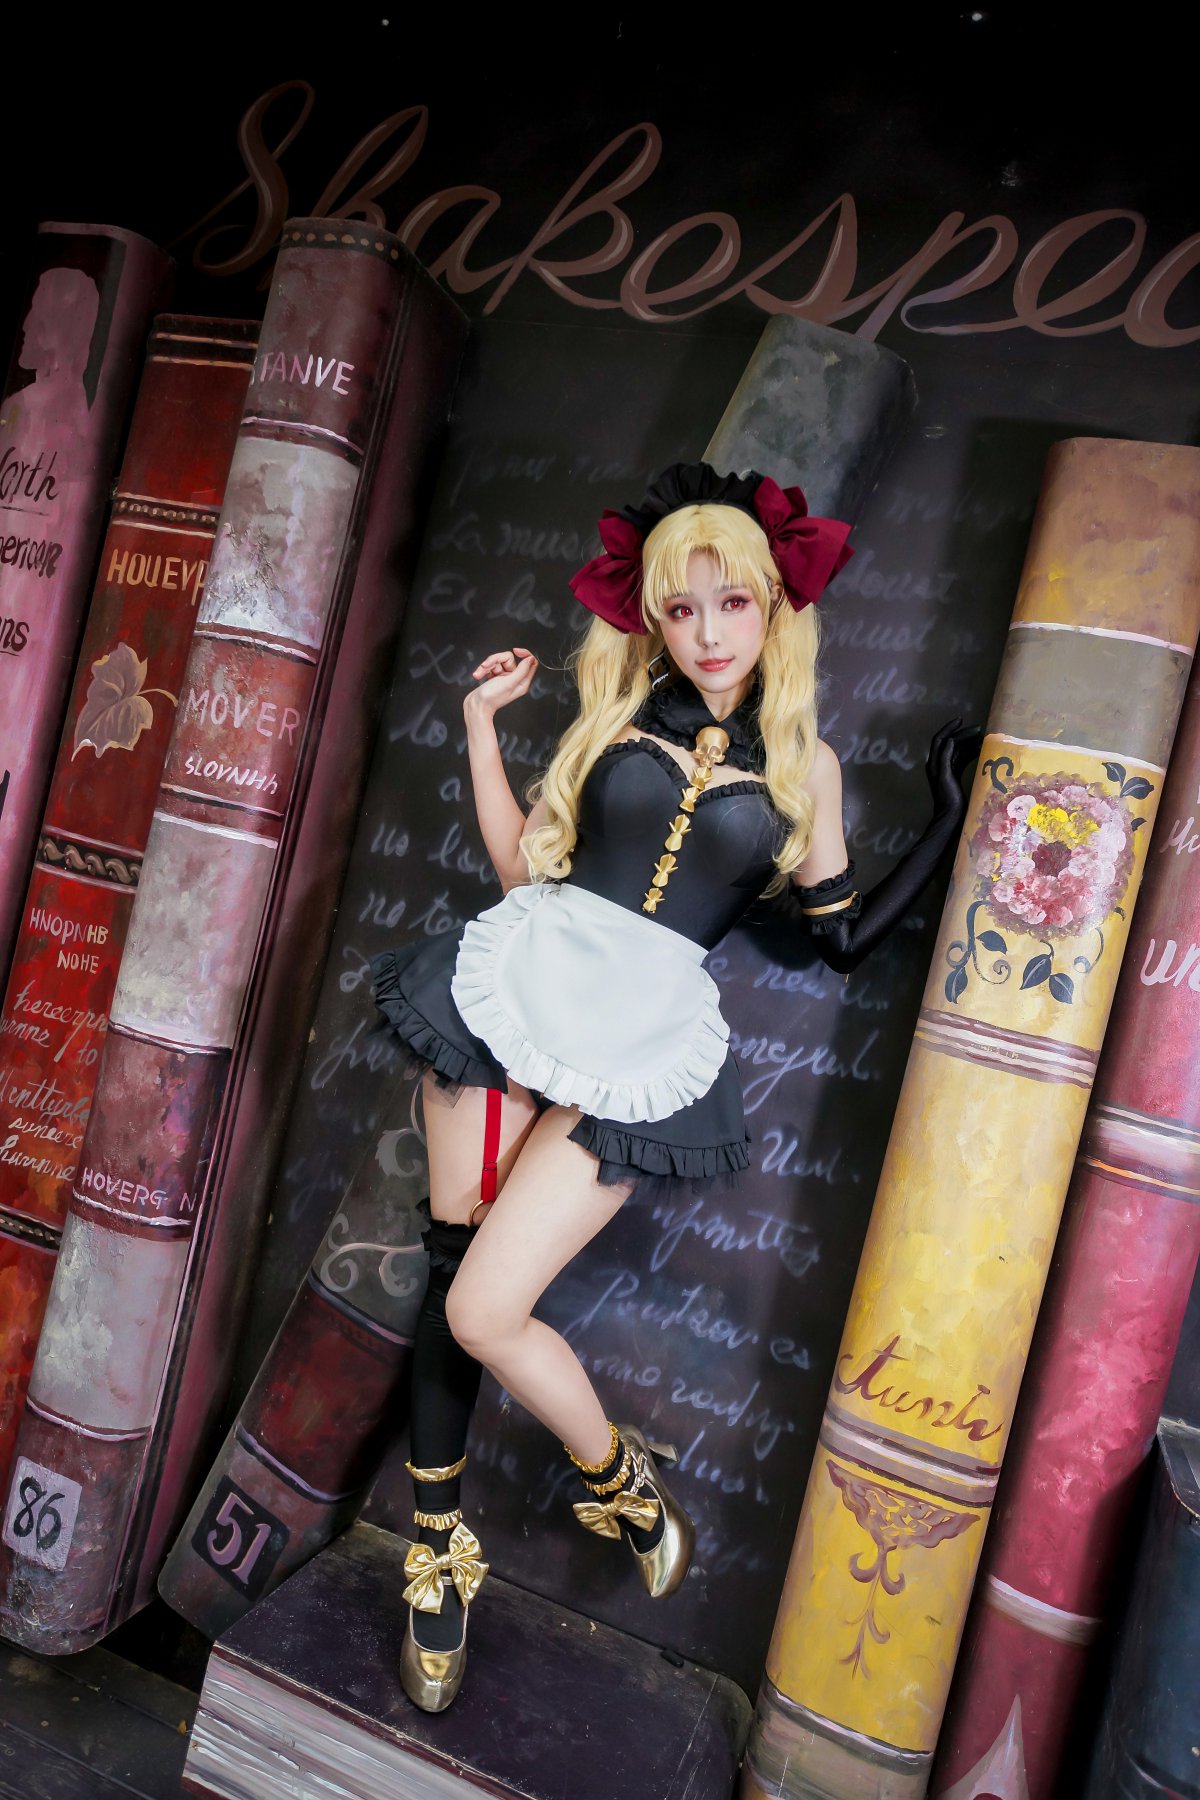 Coser@Ely Vol.022 ERE エレシュキガル 写真 A 0071